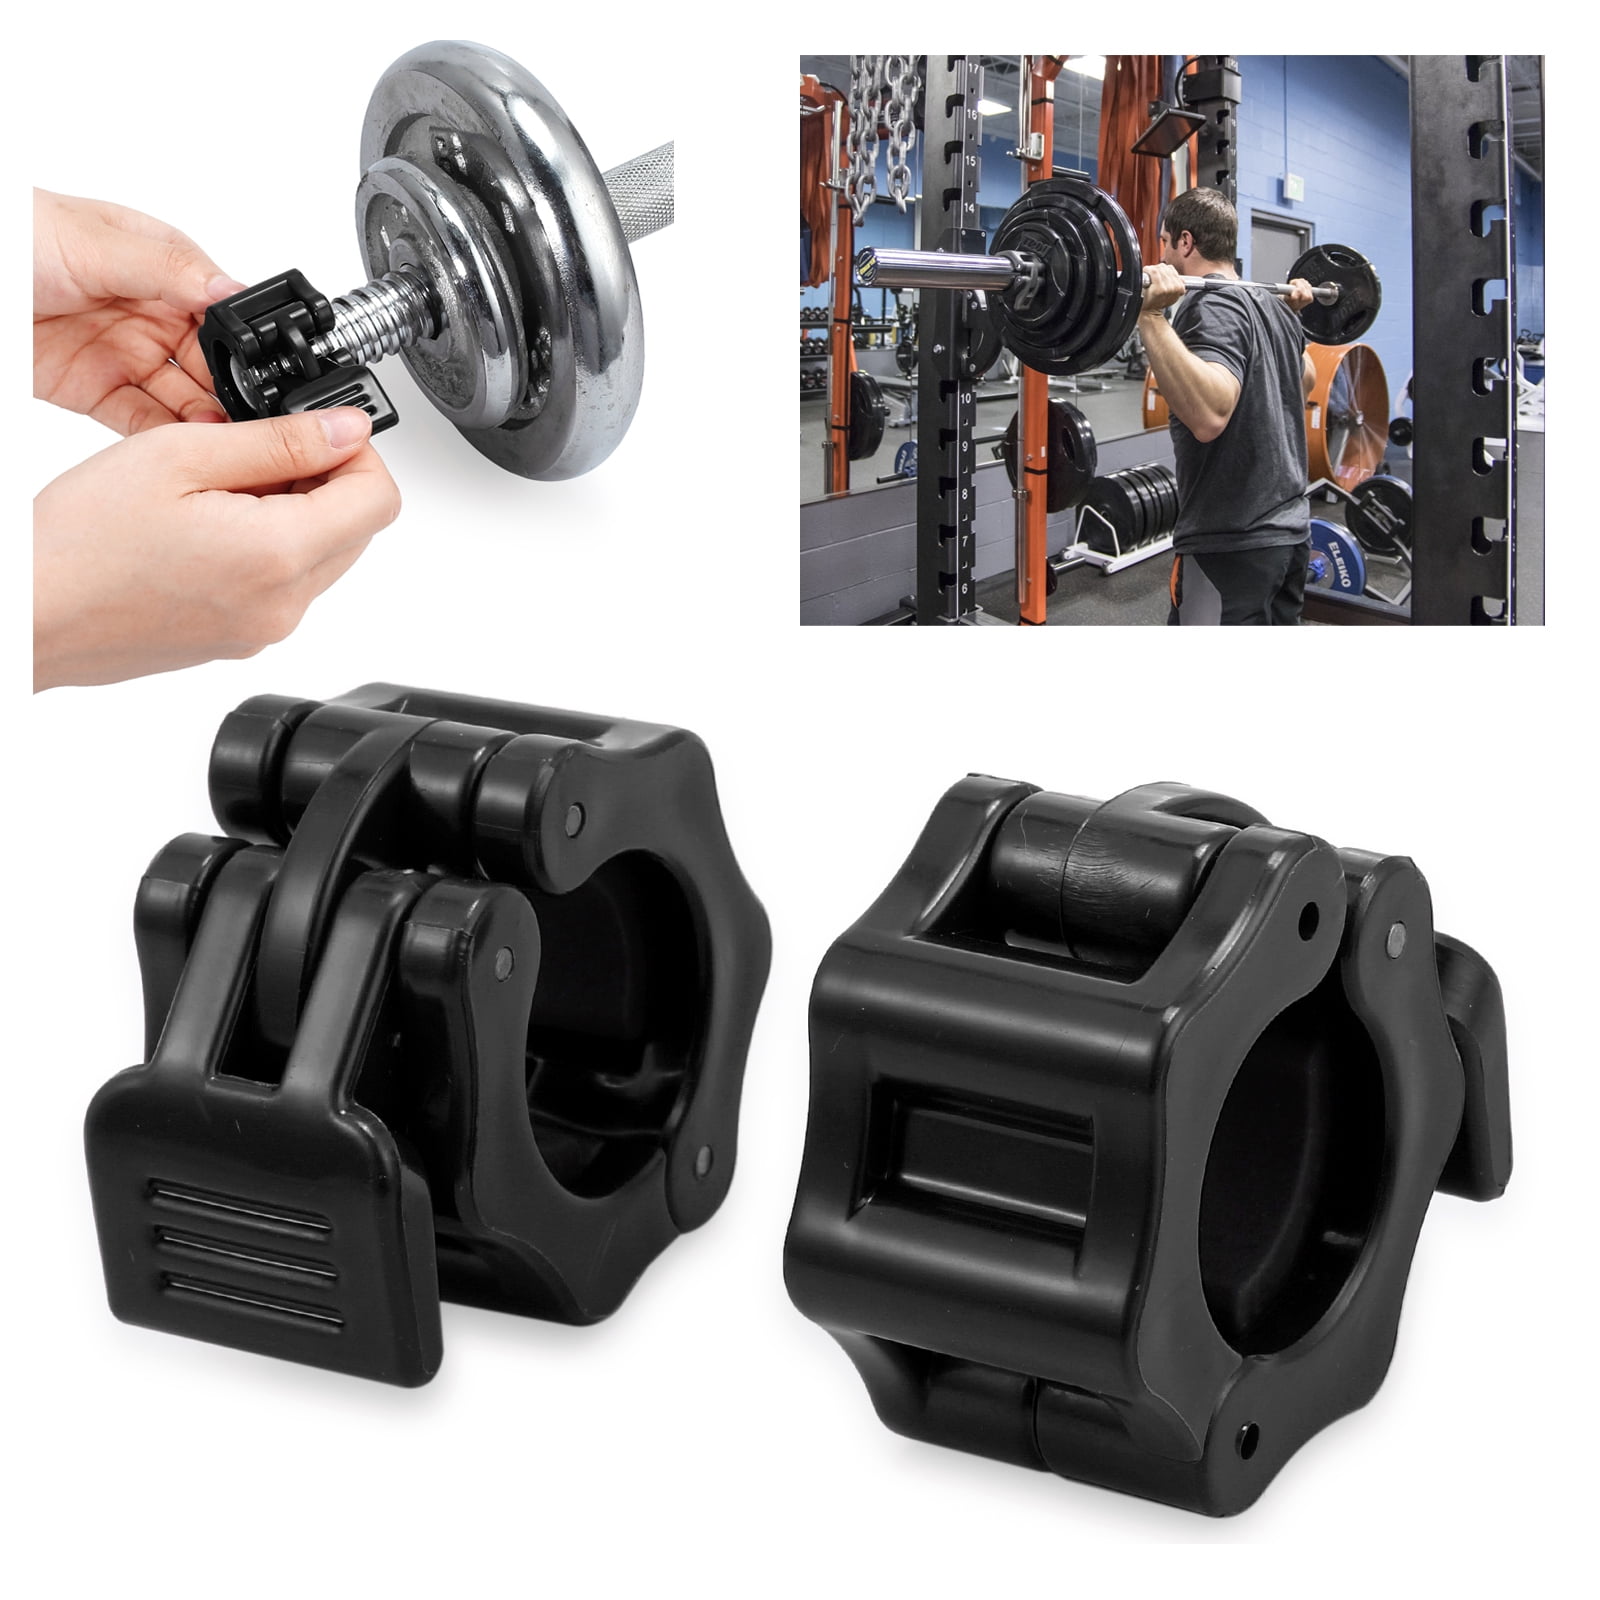 2X 25mm Spinlock Collars Barbell Dumbell Clips Clamp Weight Bar Lock Black 